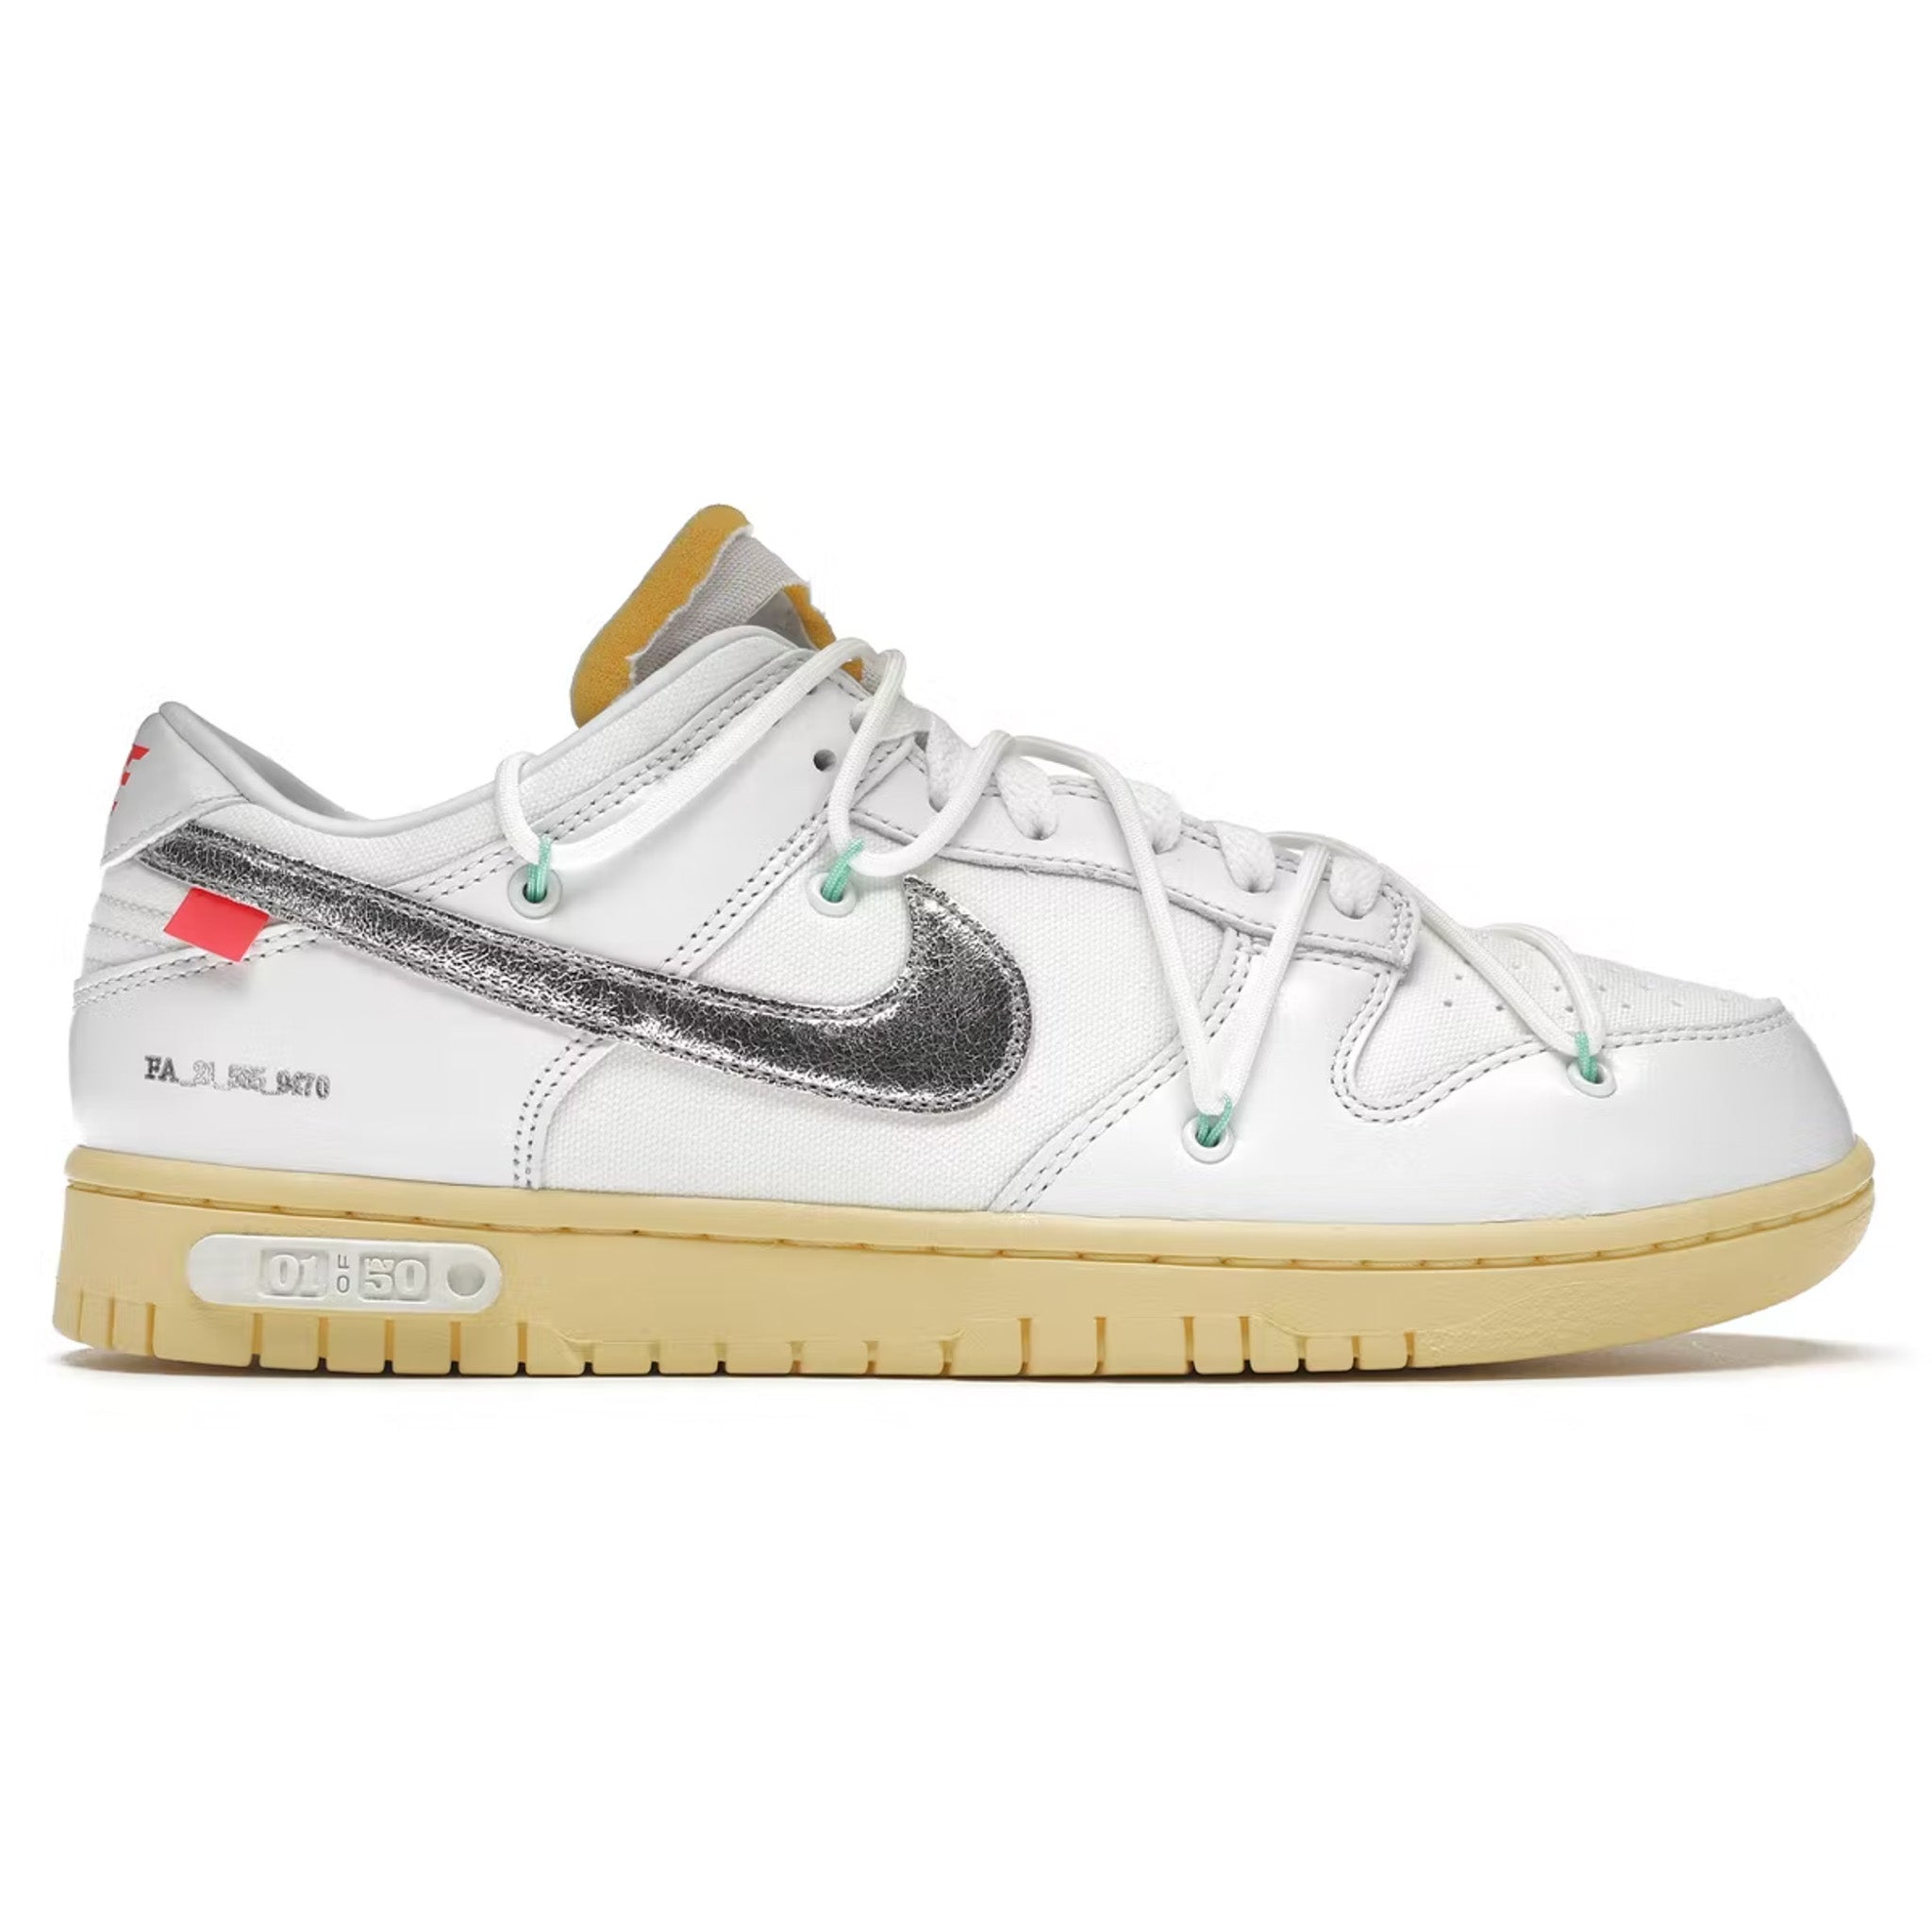 Image of Nike x Off White Dunk Low Lot 1